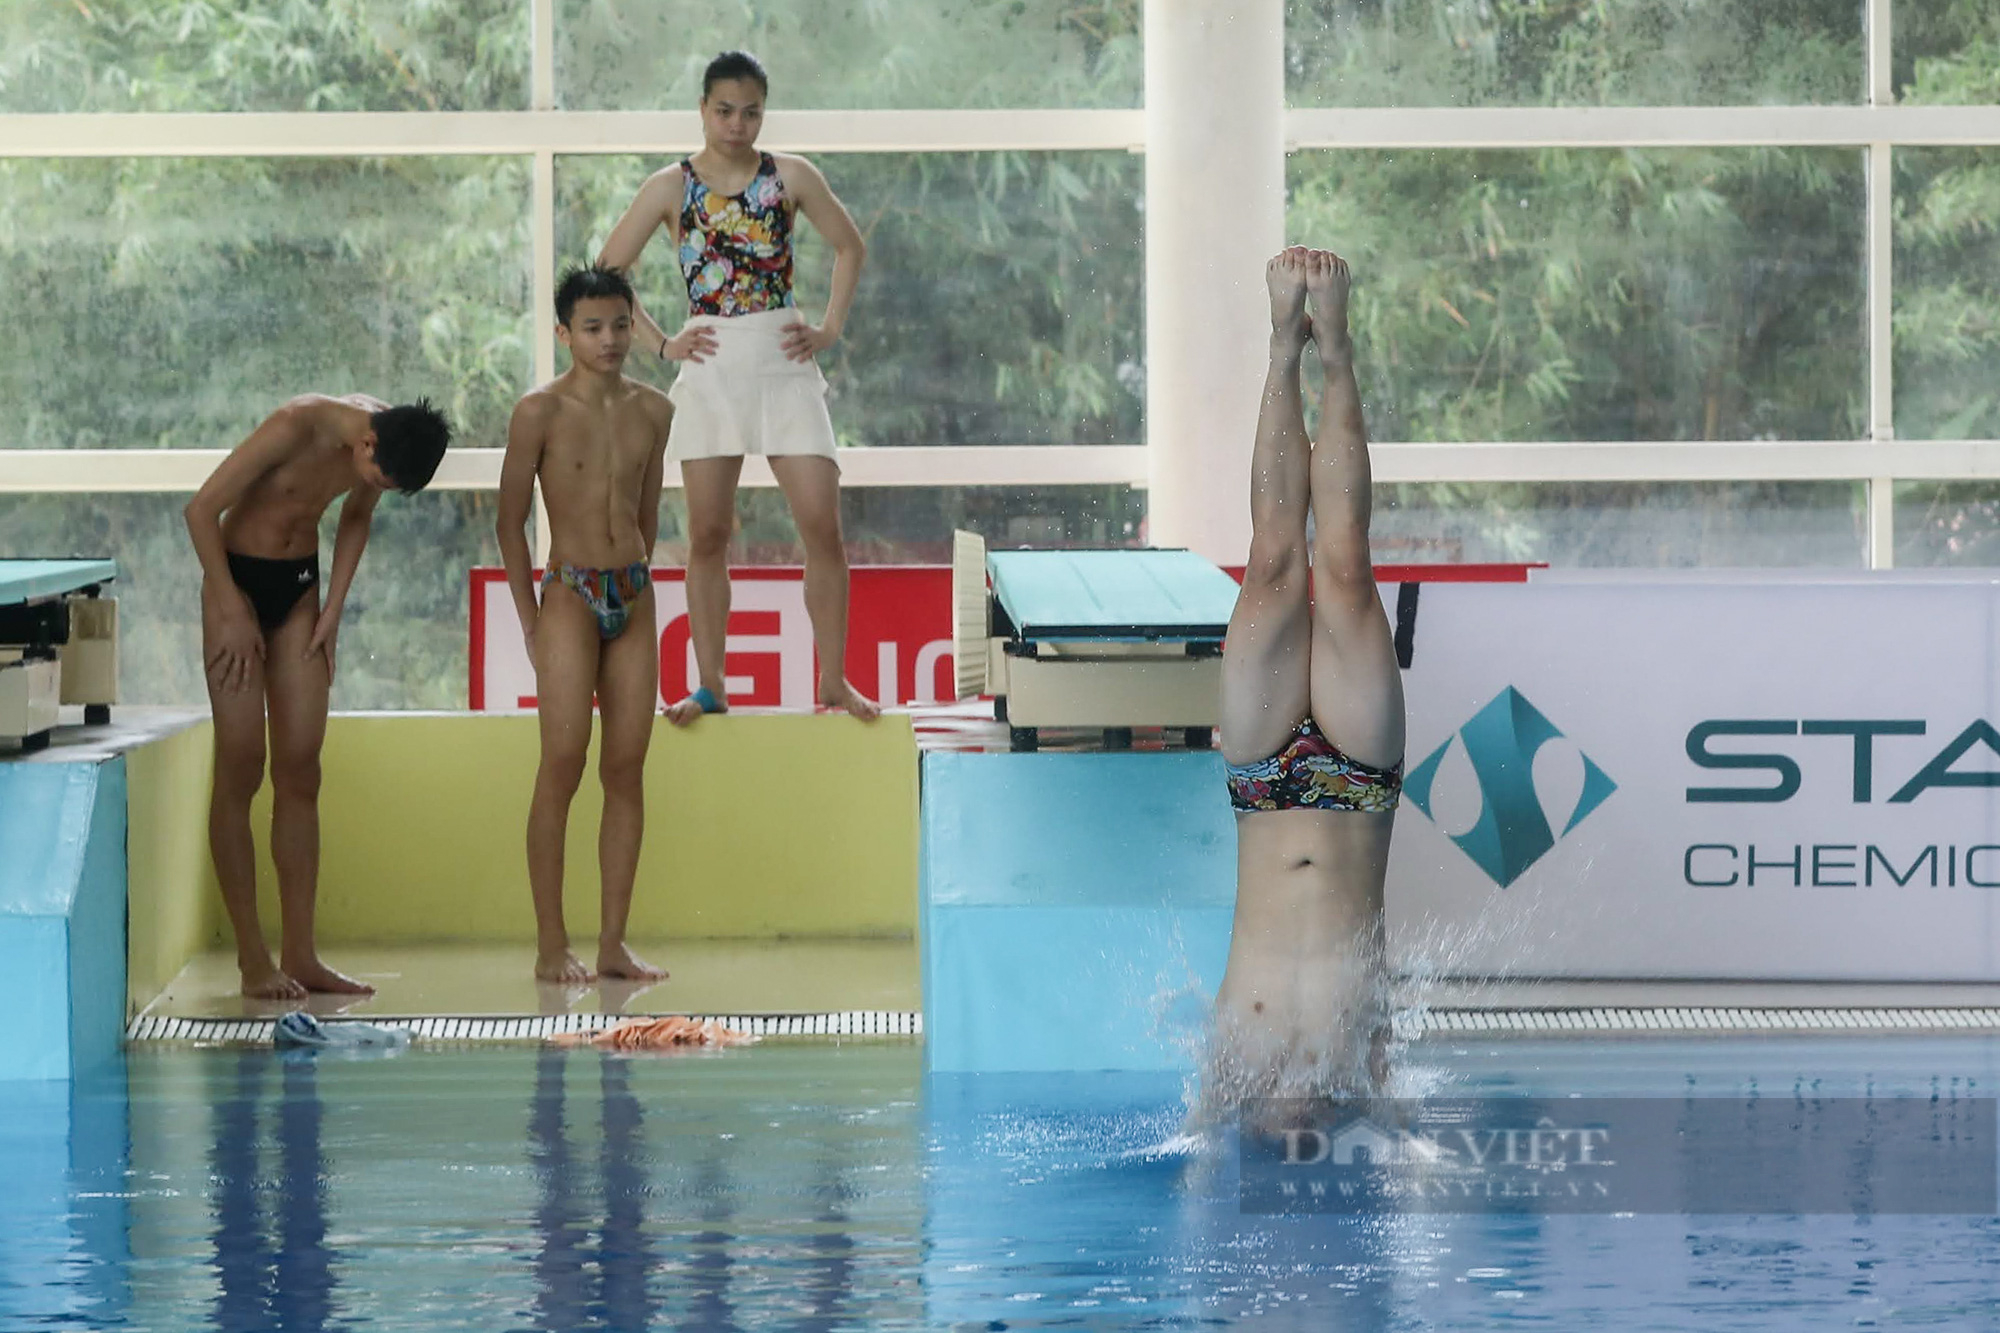 Watch with your own eyes the Vietnamese diving team practice to prepare for the 31st SEA Games - Photo 6.